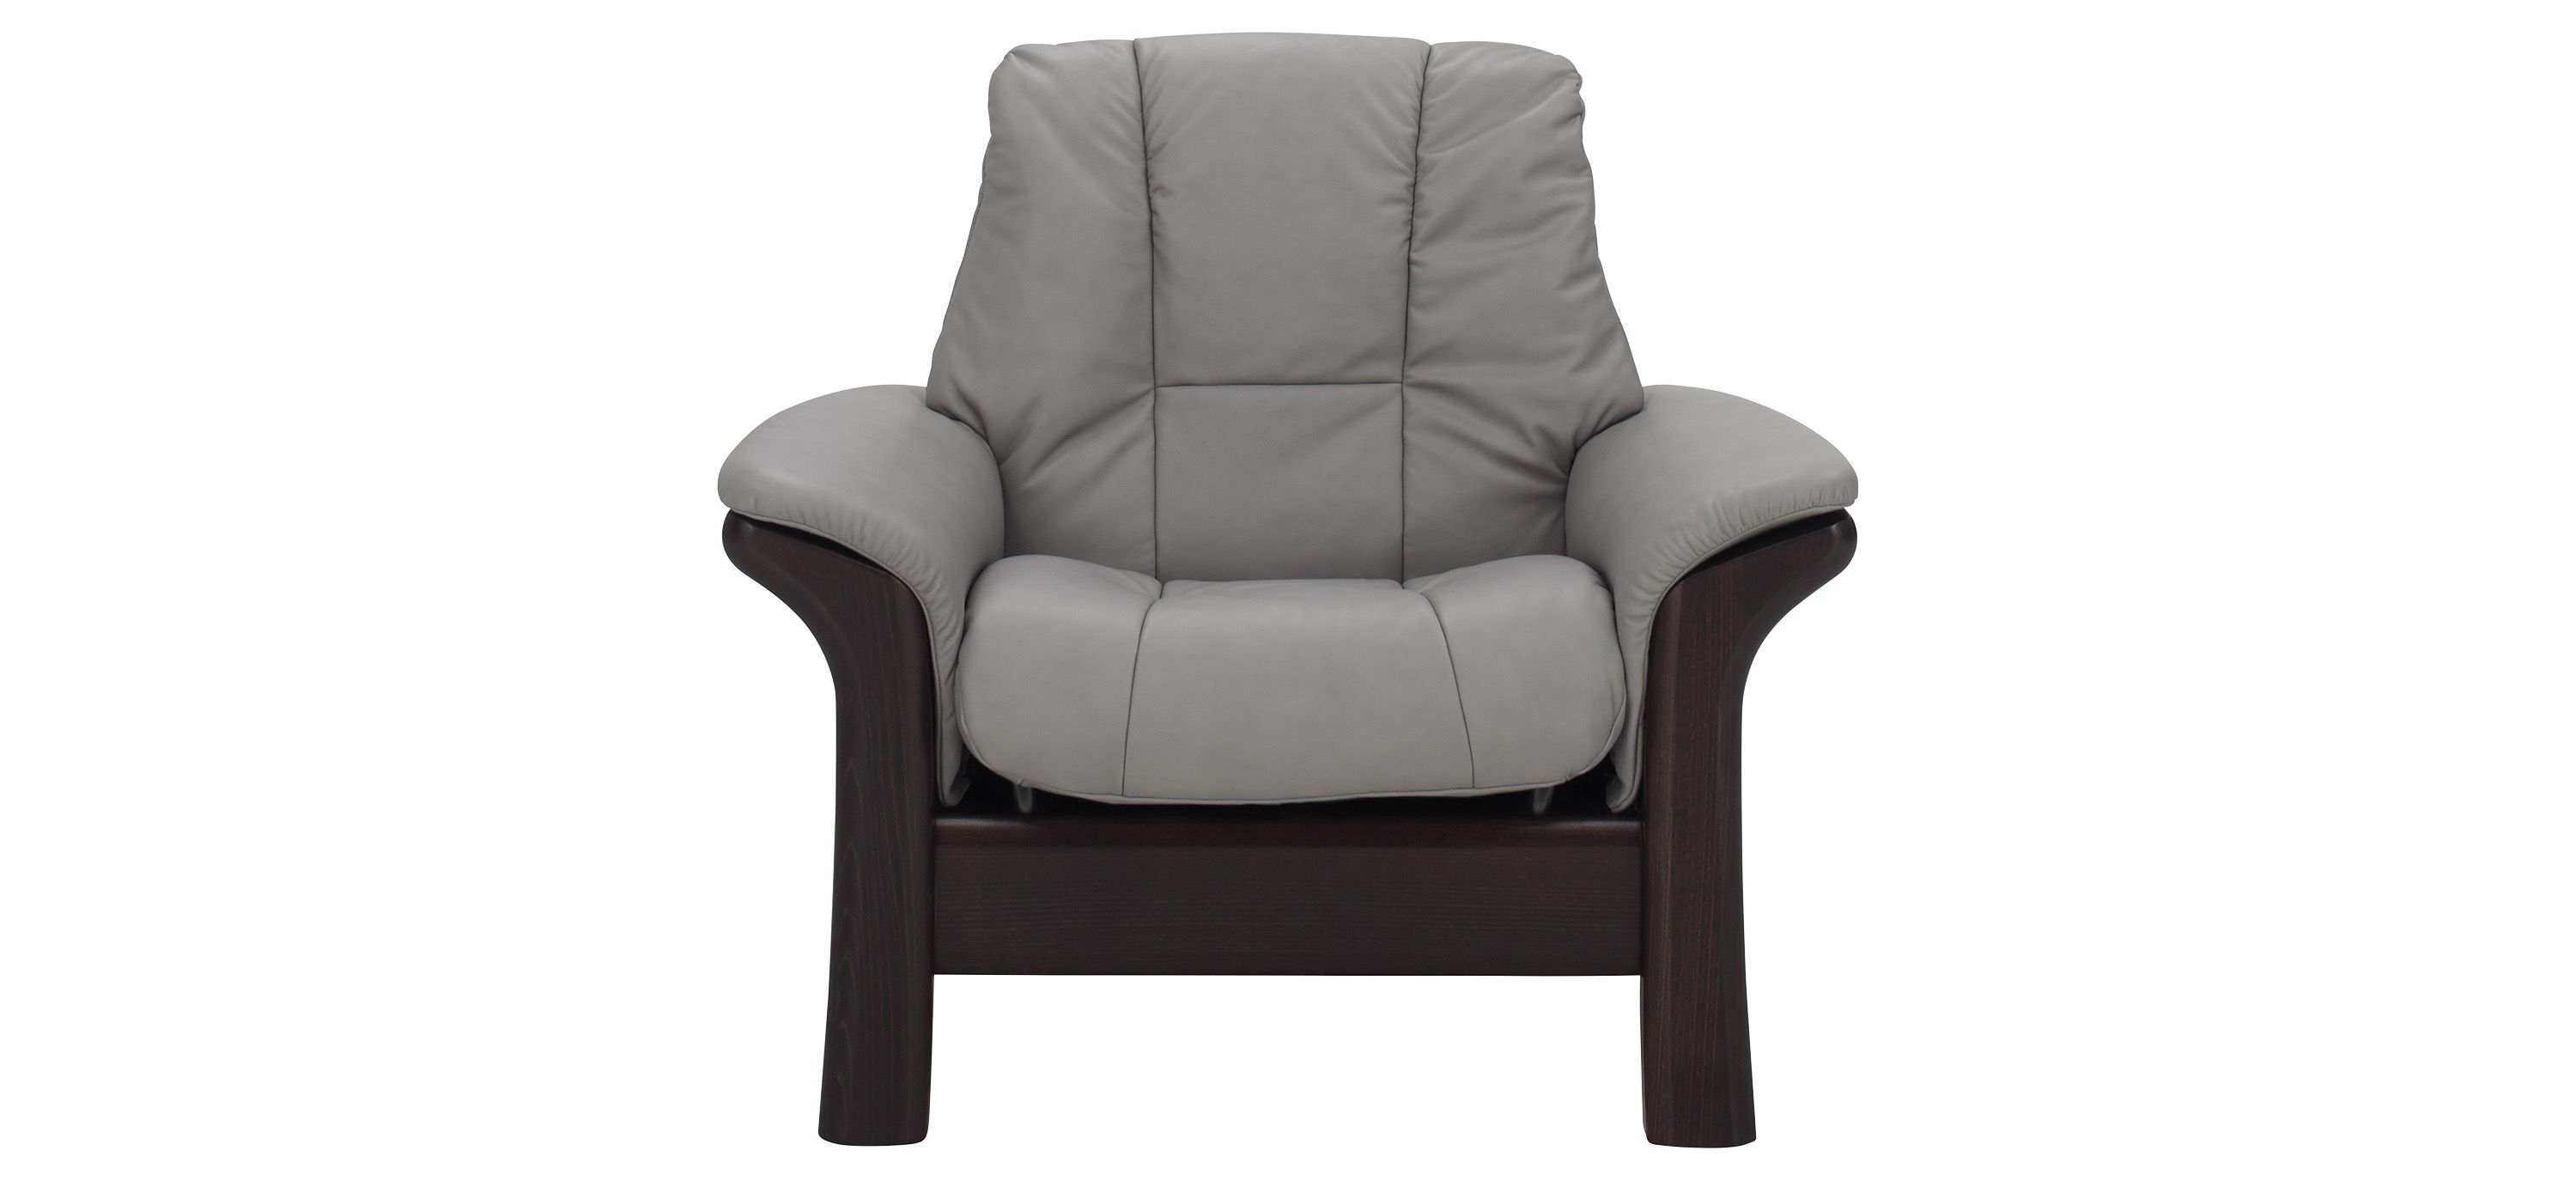 Stressless Windsor Leather Reclining Low-Back Chair